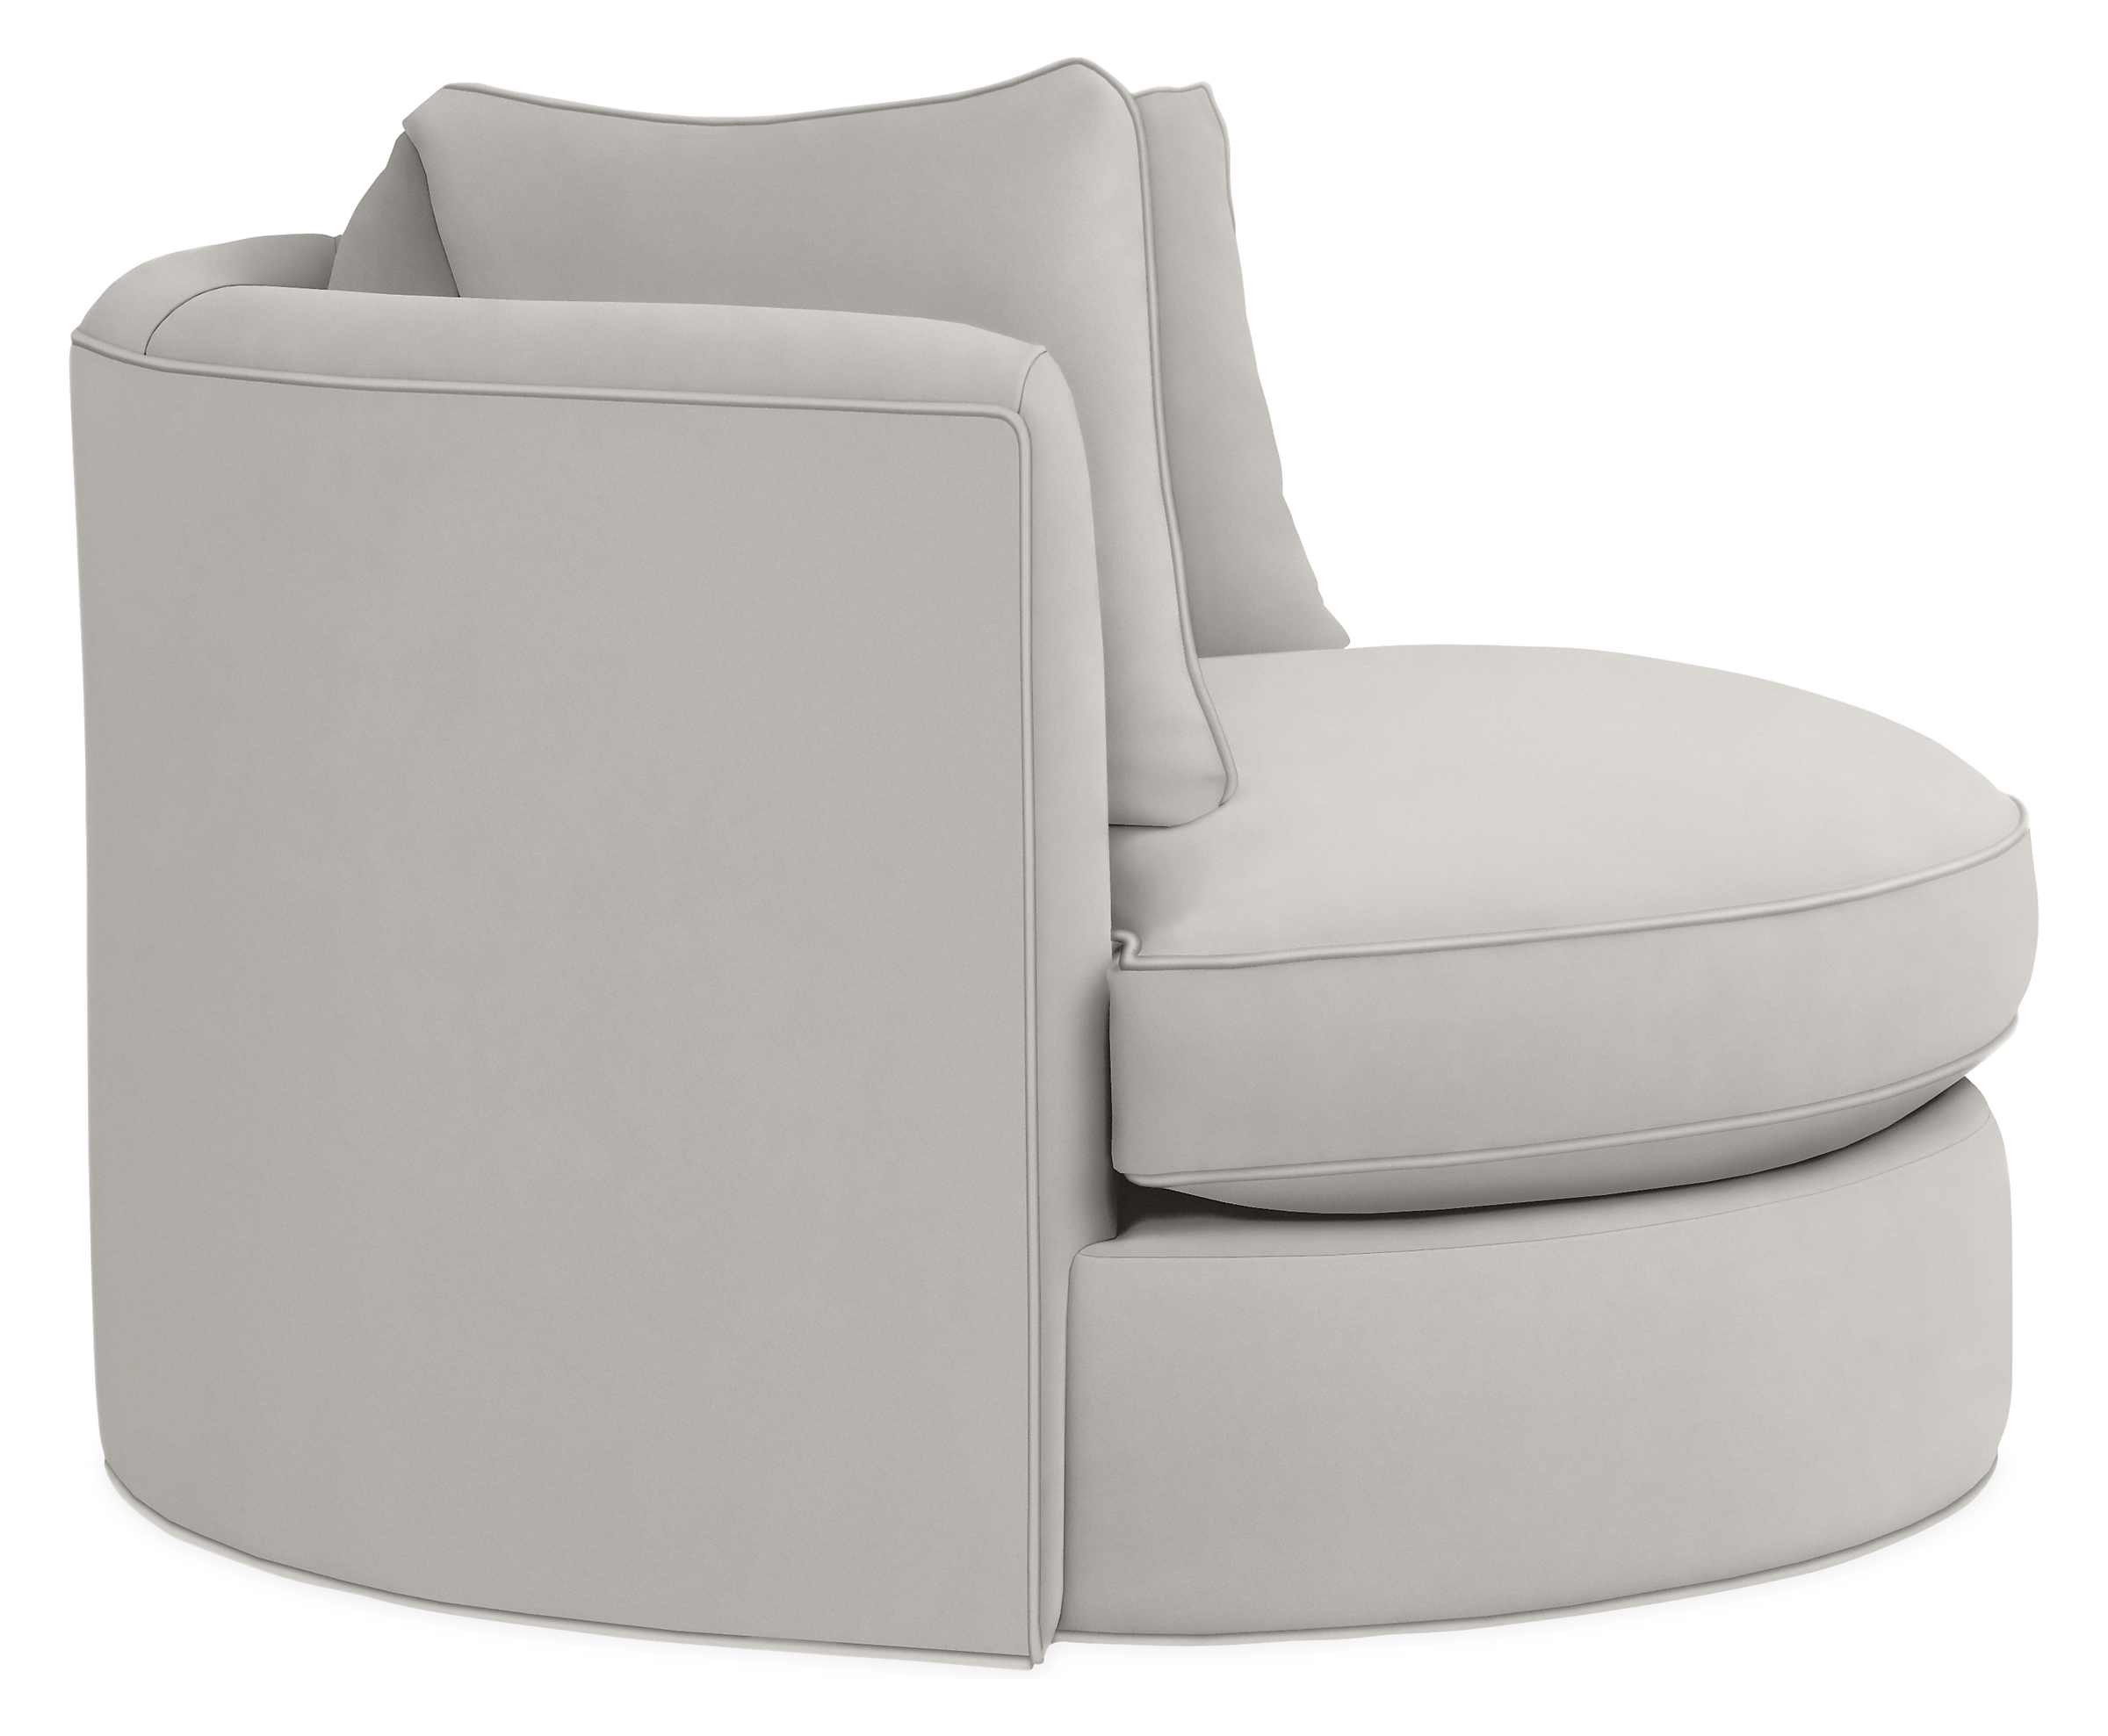 Side view of Eos Swivel Chair in View Grey.